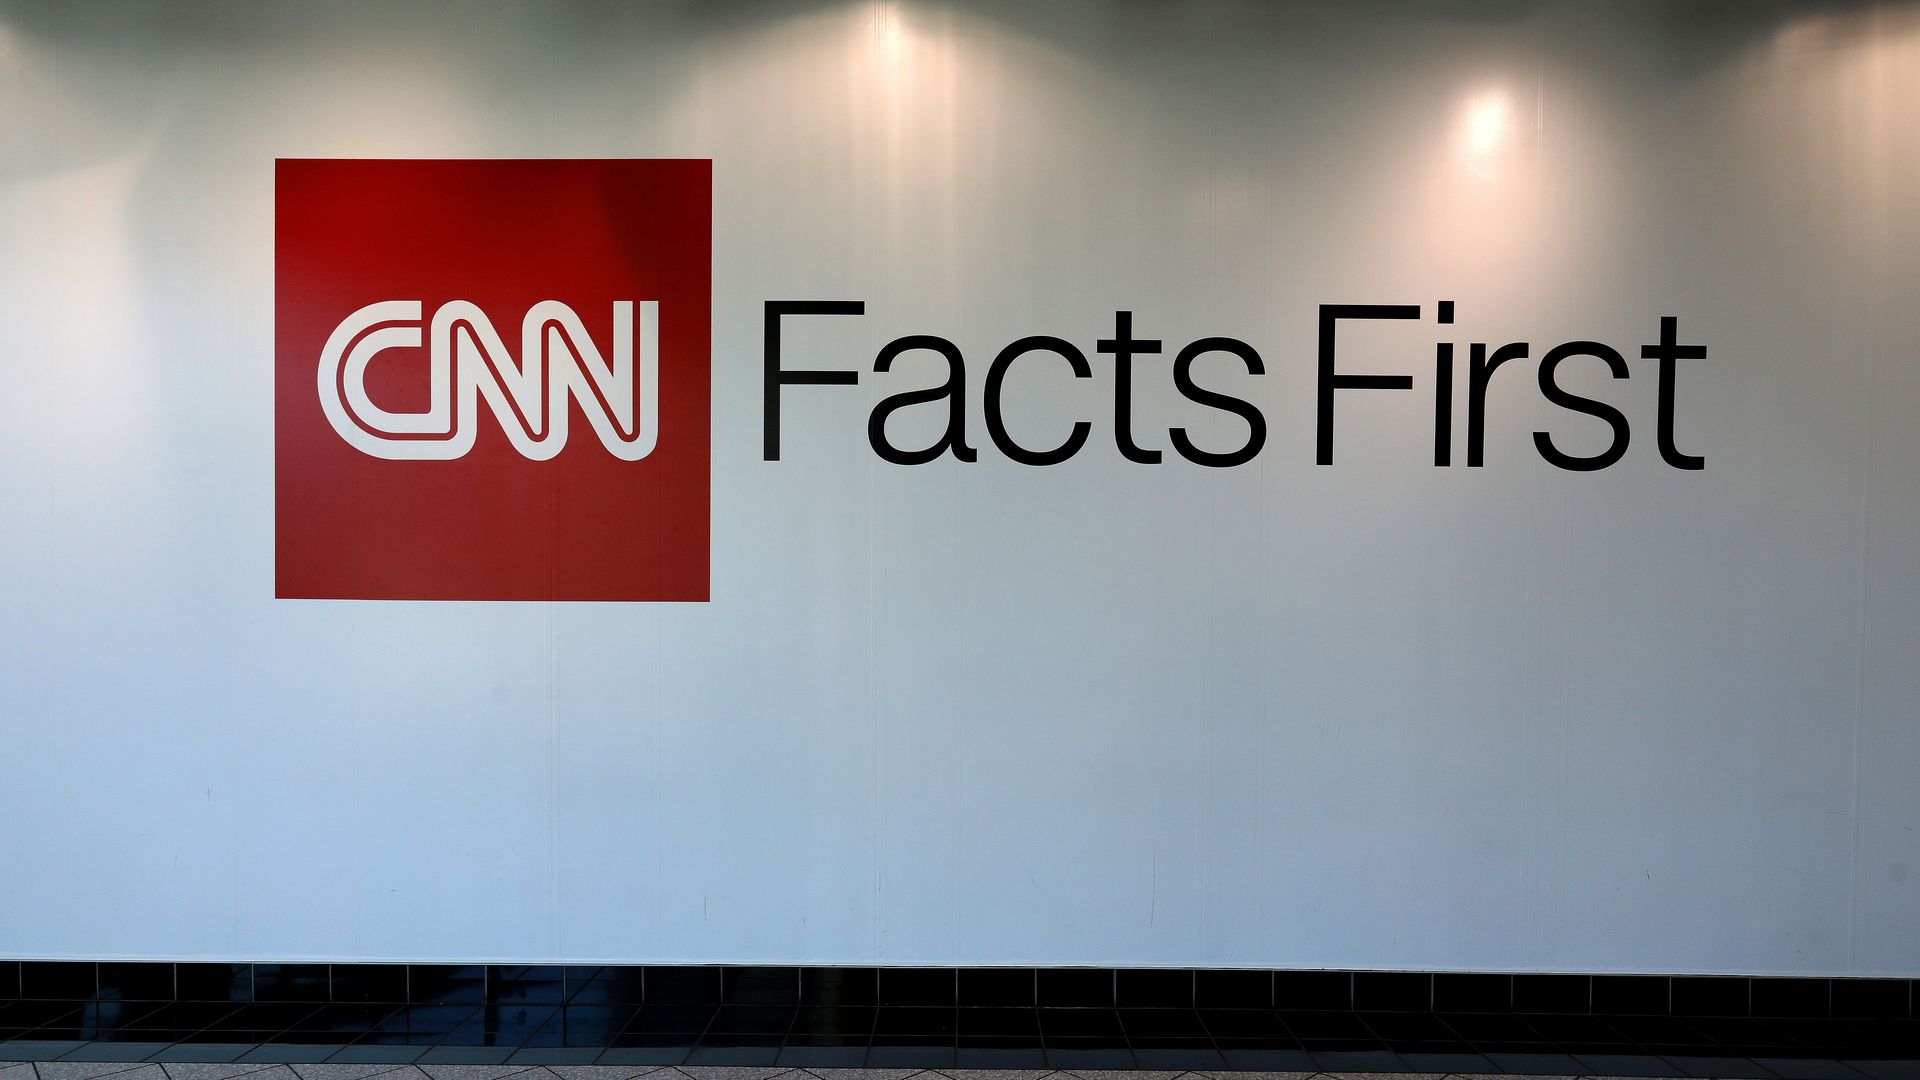 "CNN, Facts First" is written on a white wall. 